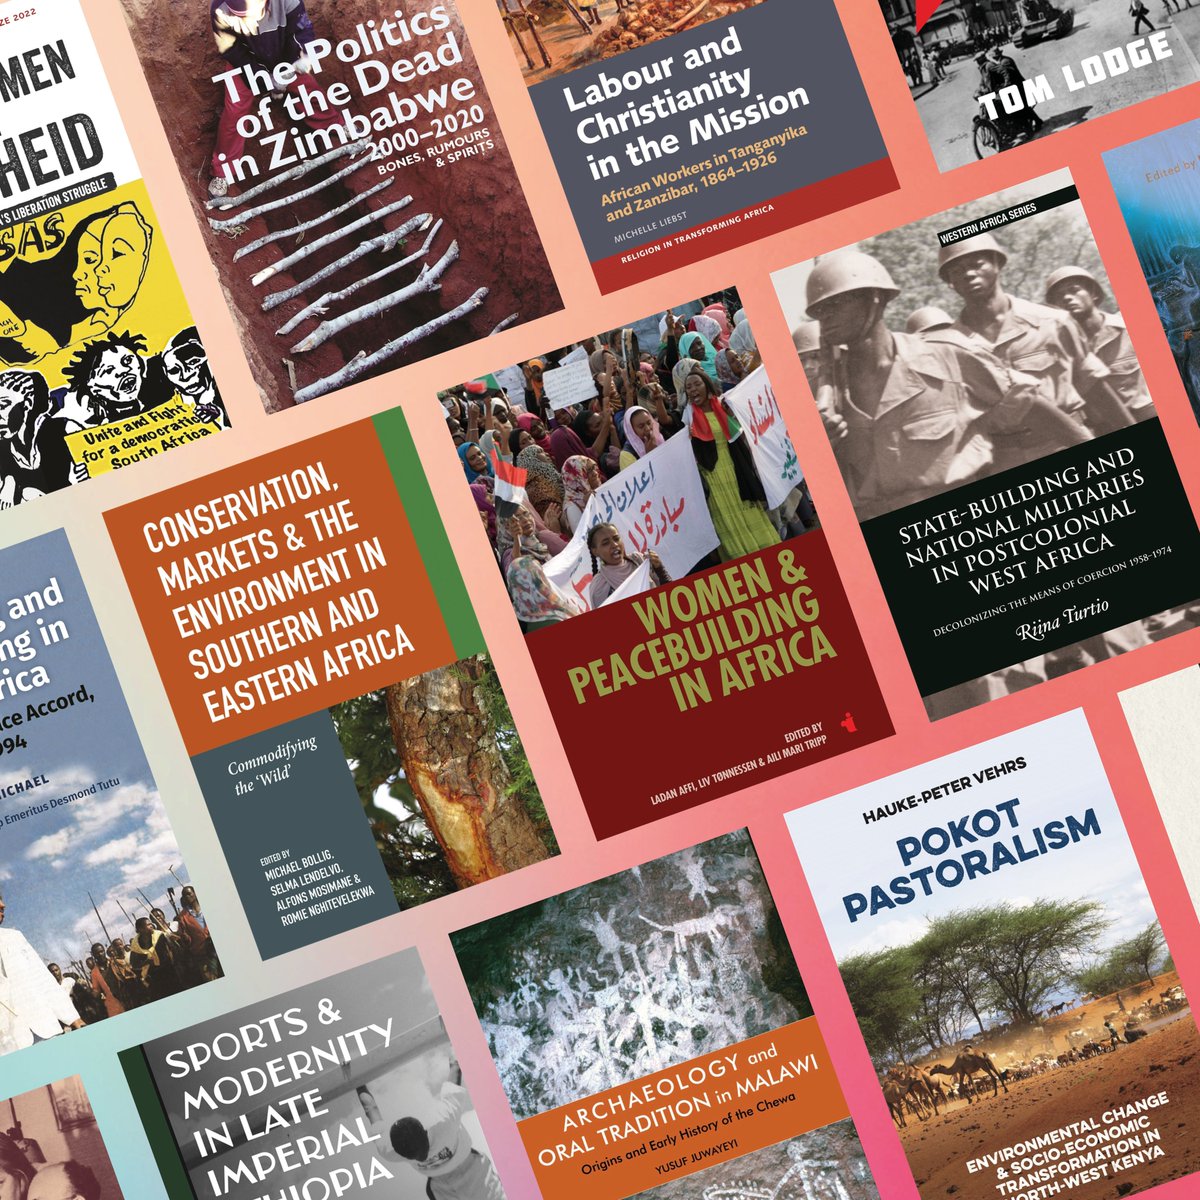 Just a few of the new and best-selling titles included in our paperback sale, now on. Save 40% and get free shipping too! buff.ly/3J8zOzj #BookSale #AfricanStudies